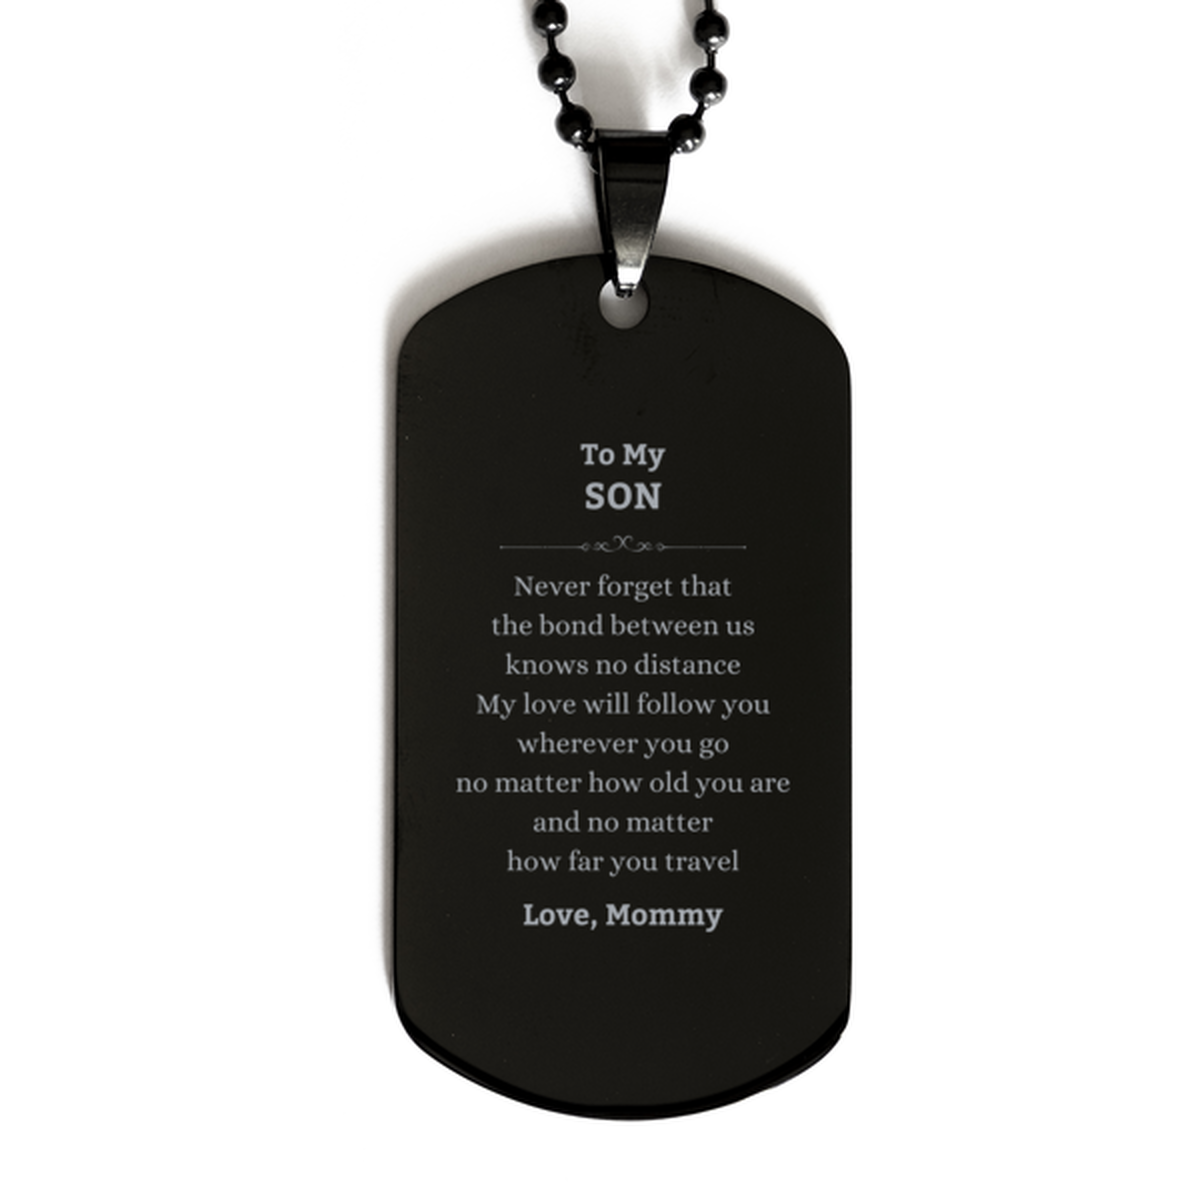 Son Birthday Gifts from Mommy, Adjustable Black Dog Tag for Son Christmas Graduation Unique Gifts Son Never forget that the bond between us knows no distance. Love, Mommy